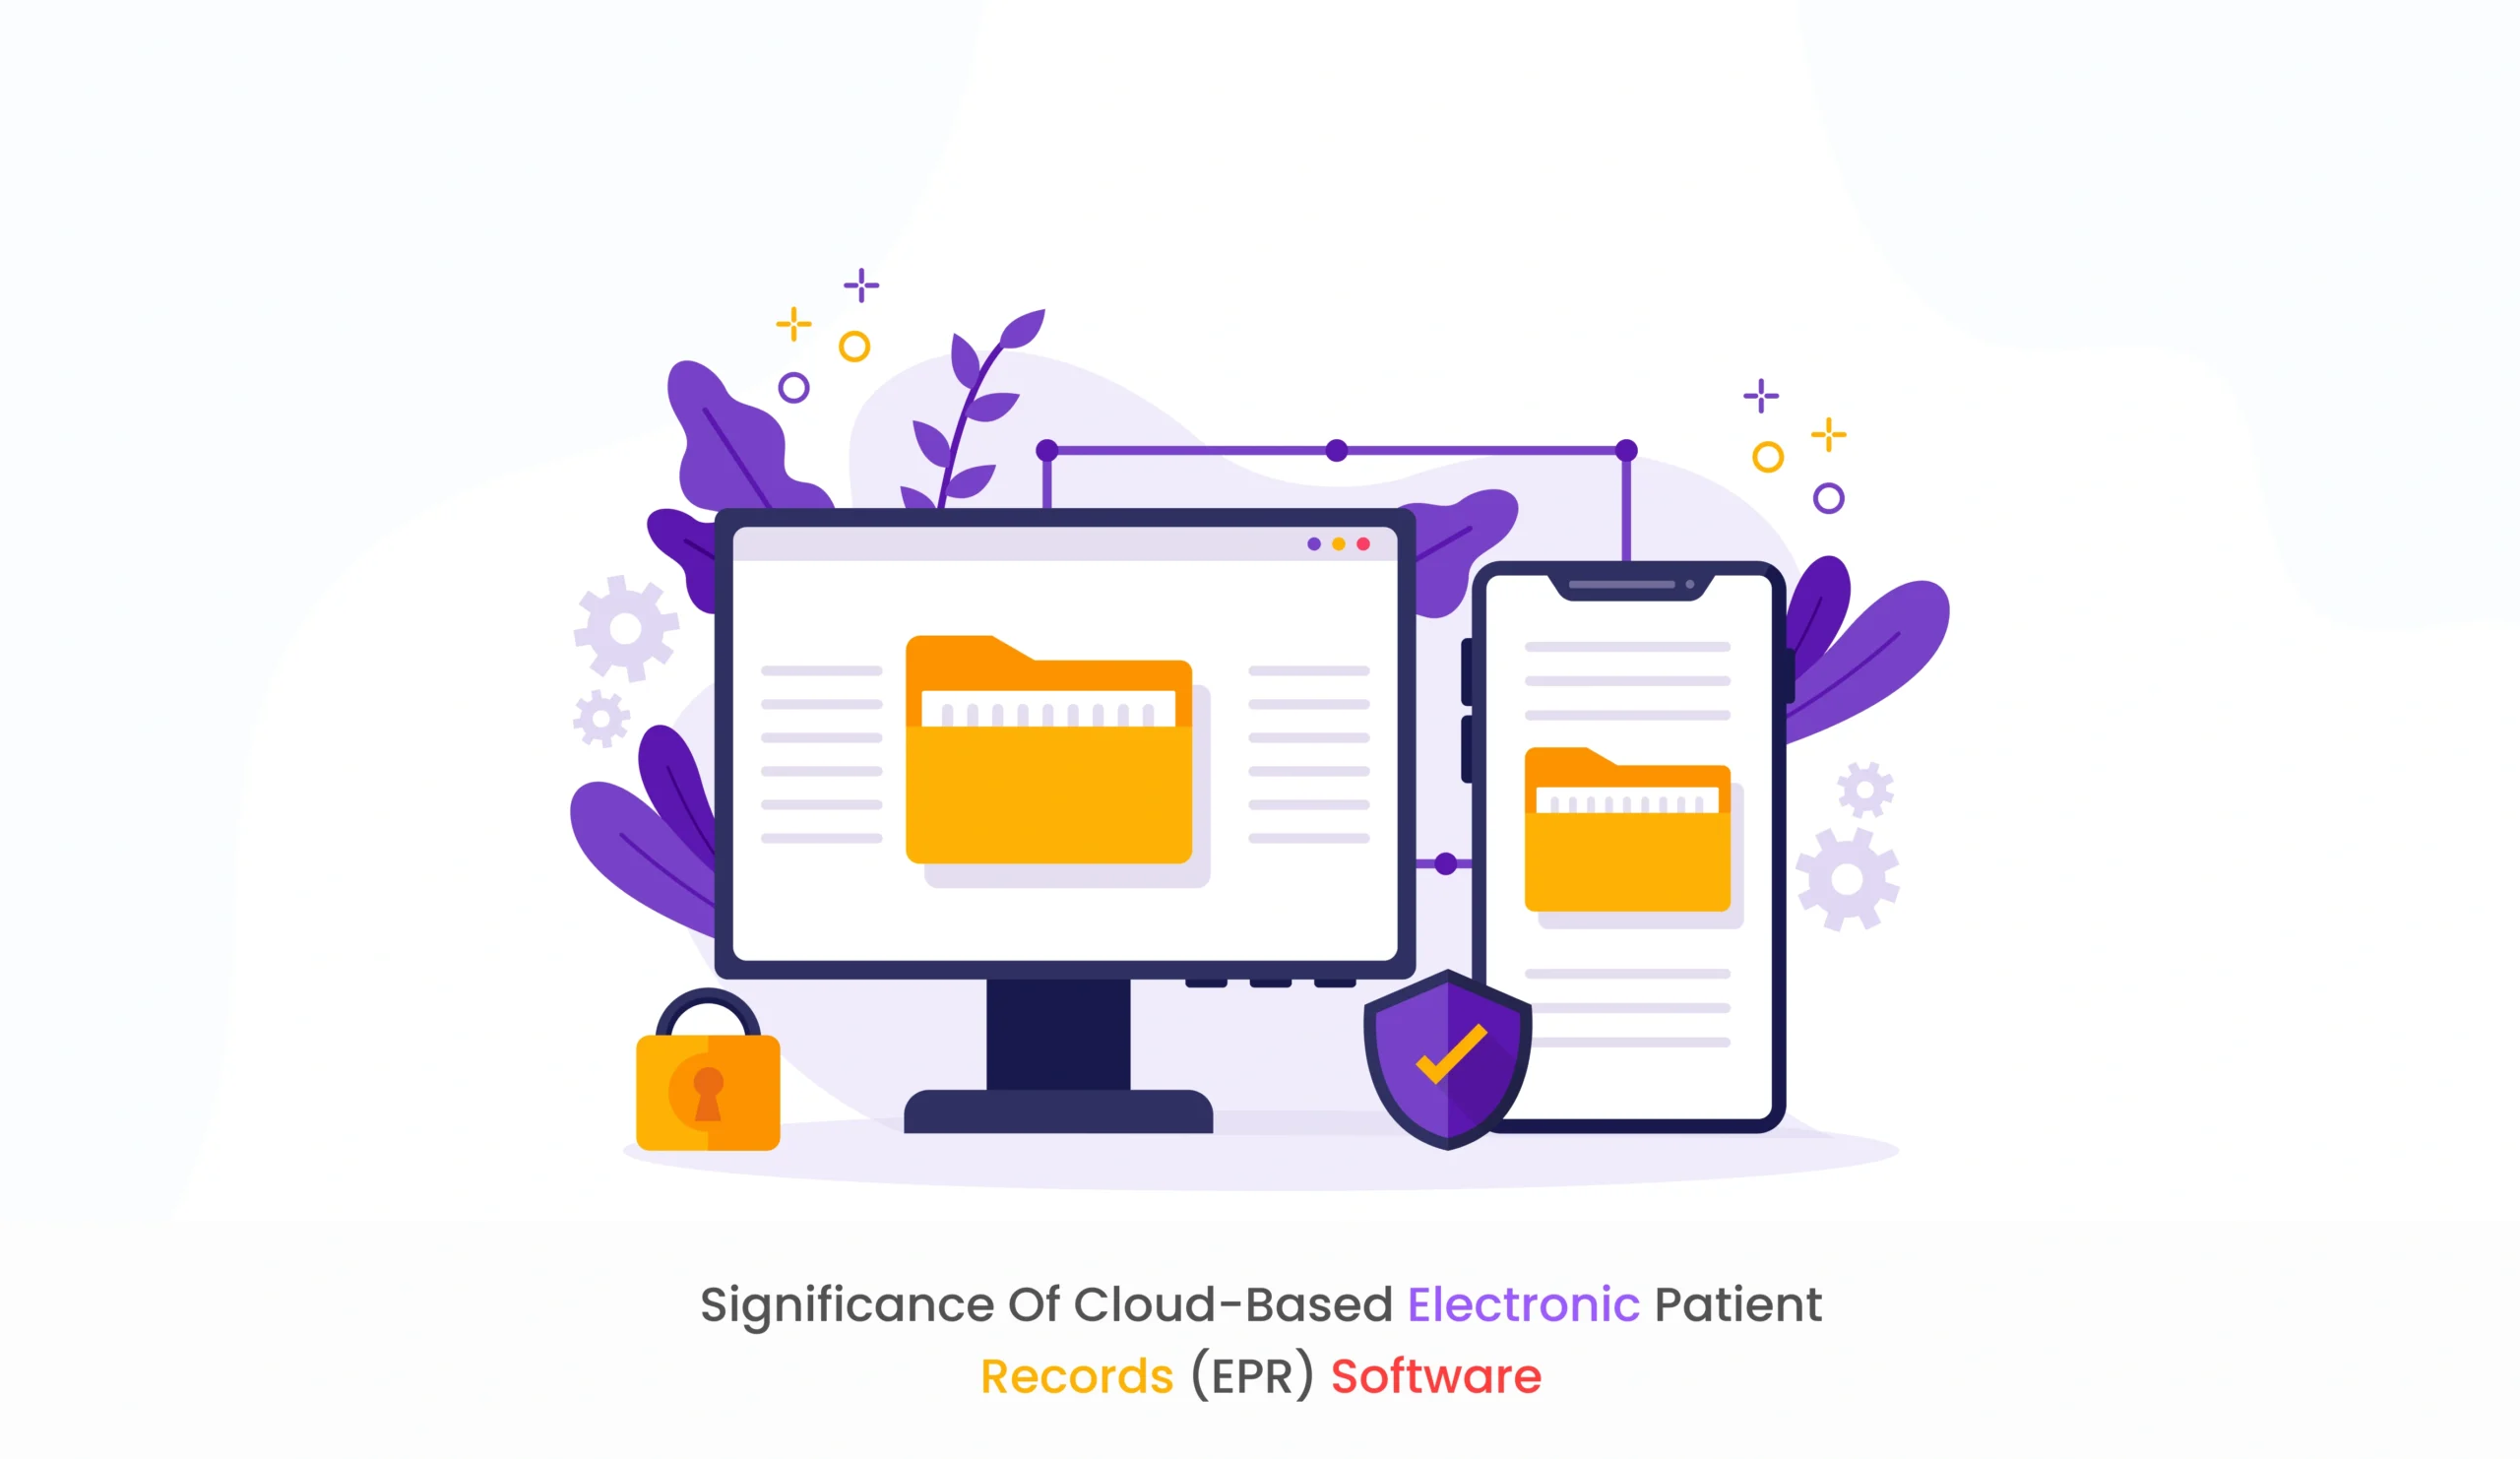 Significance of Cloud-Based Electronic Patient Records (EPR) Software